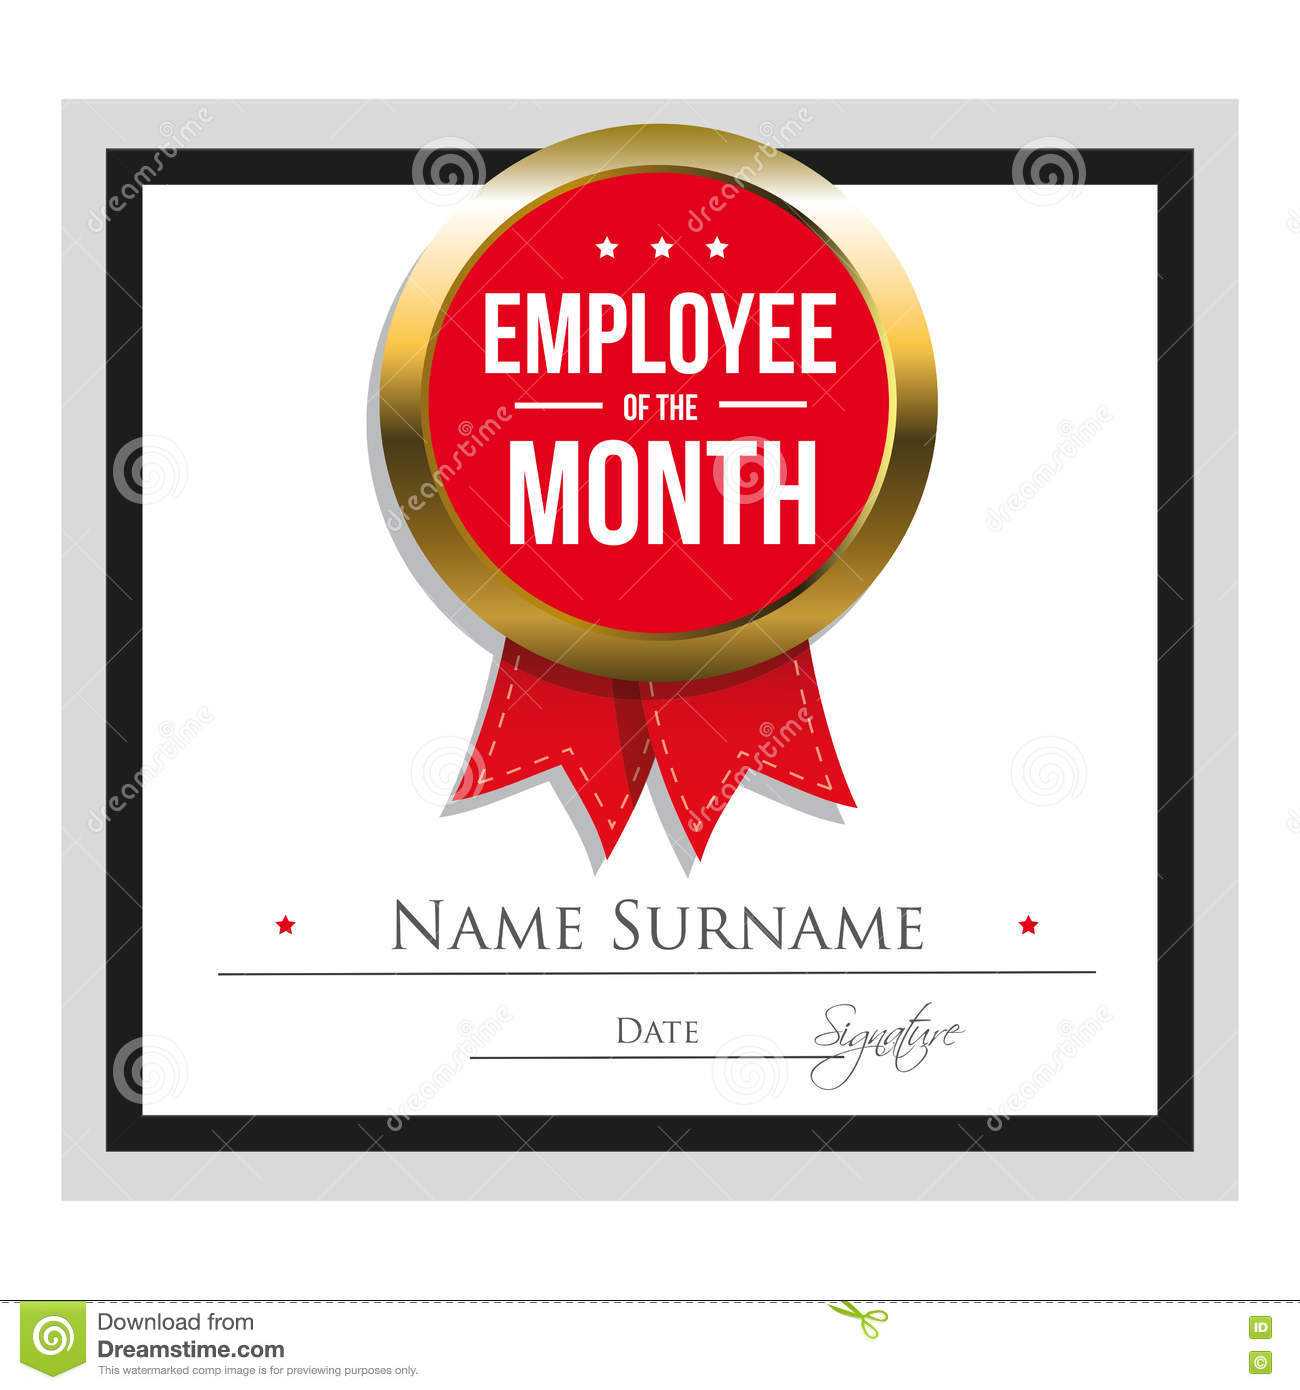 Employee Of The Month Certificate Template Stock Vector Within Employee Of The Month Certificate Template